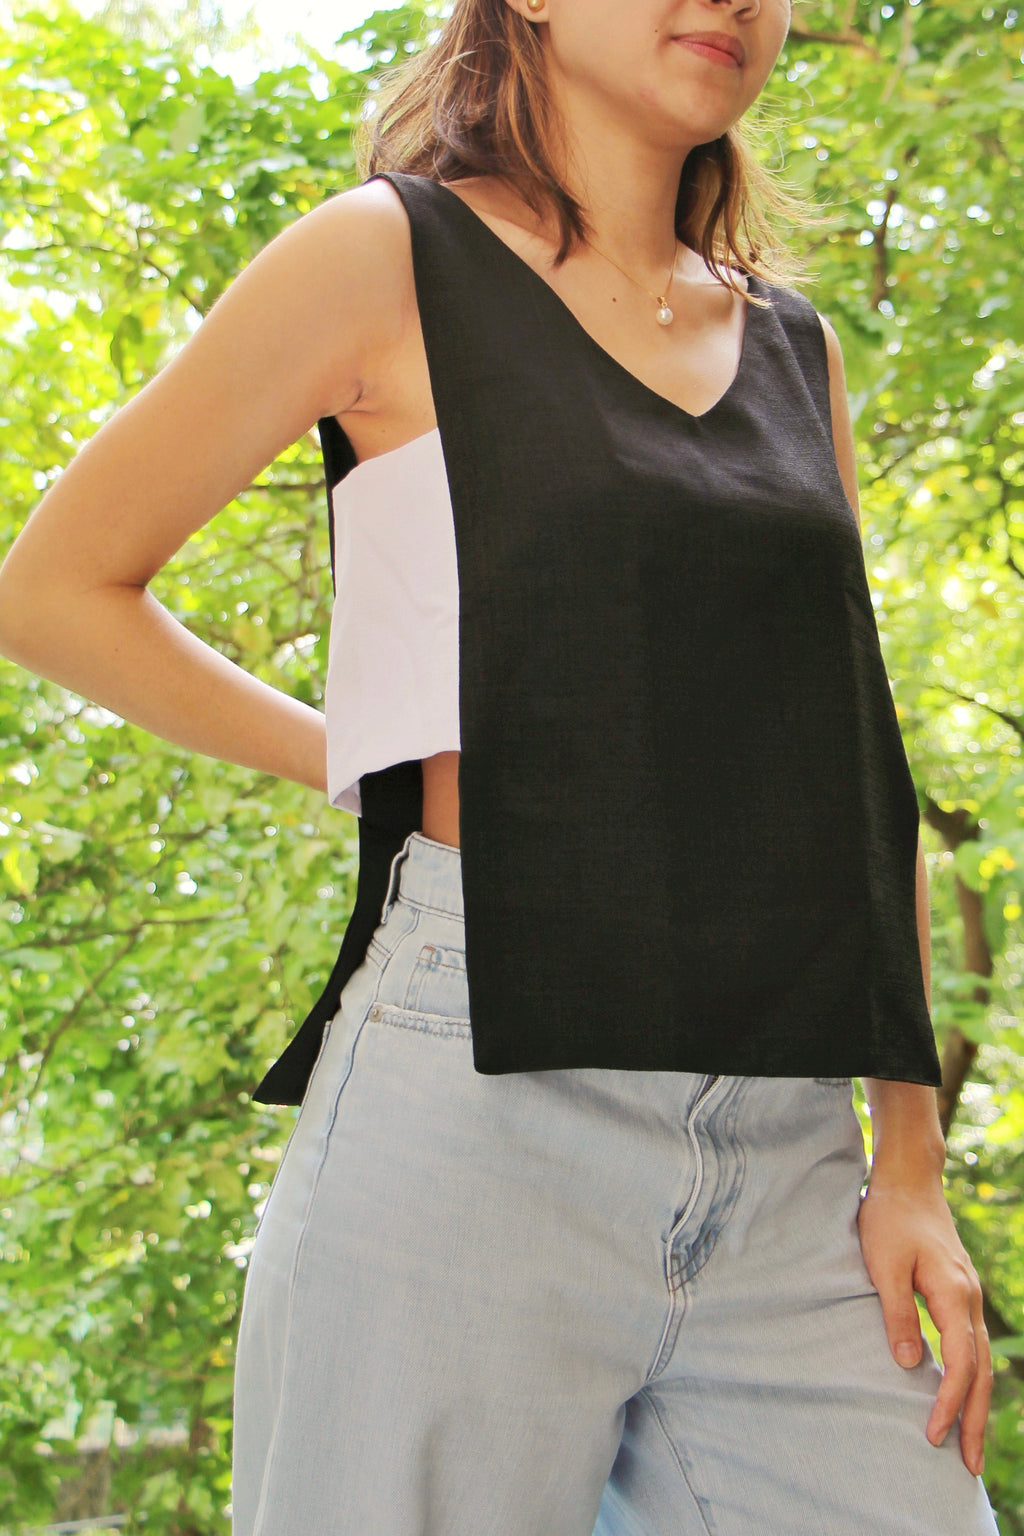 Costa Top in Charcoal & Ivory